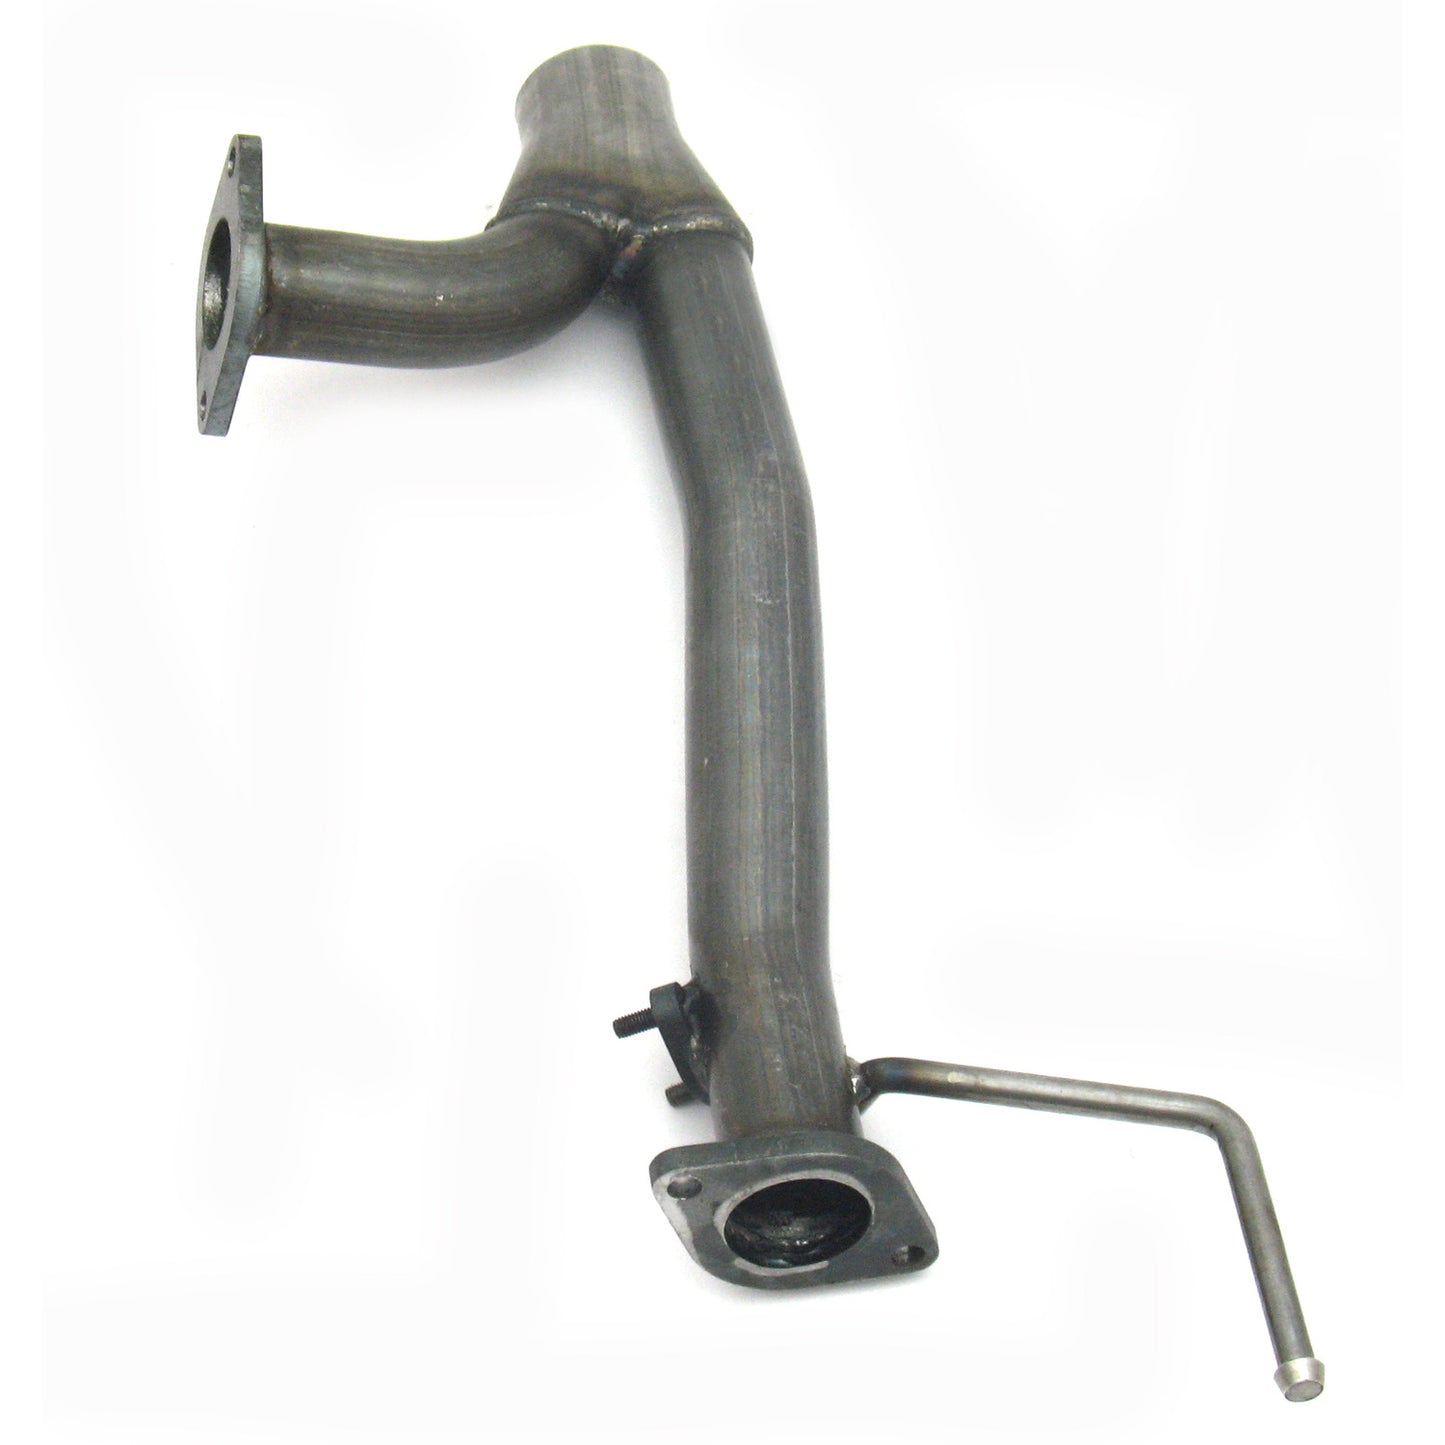 JBA Performance Exhaust 2010SY-1 2 1/4" Stainless Steel Mid-Pipe 03-04 Tundra Y-Pipe "Cutting and Welding Required"